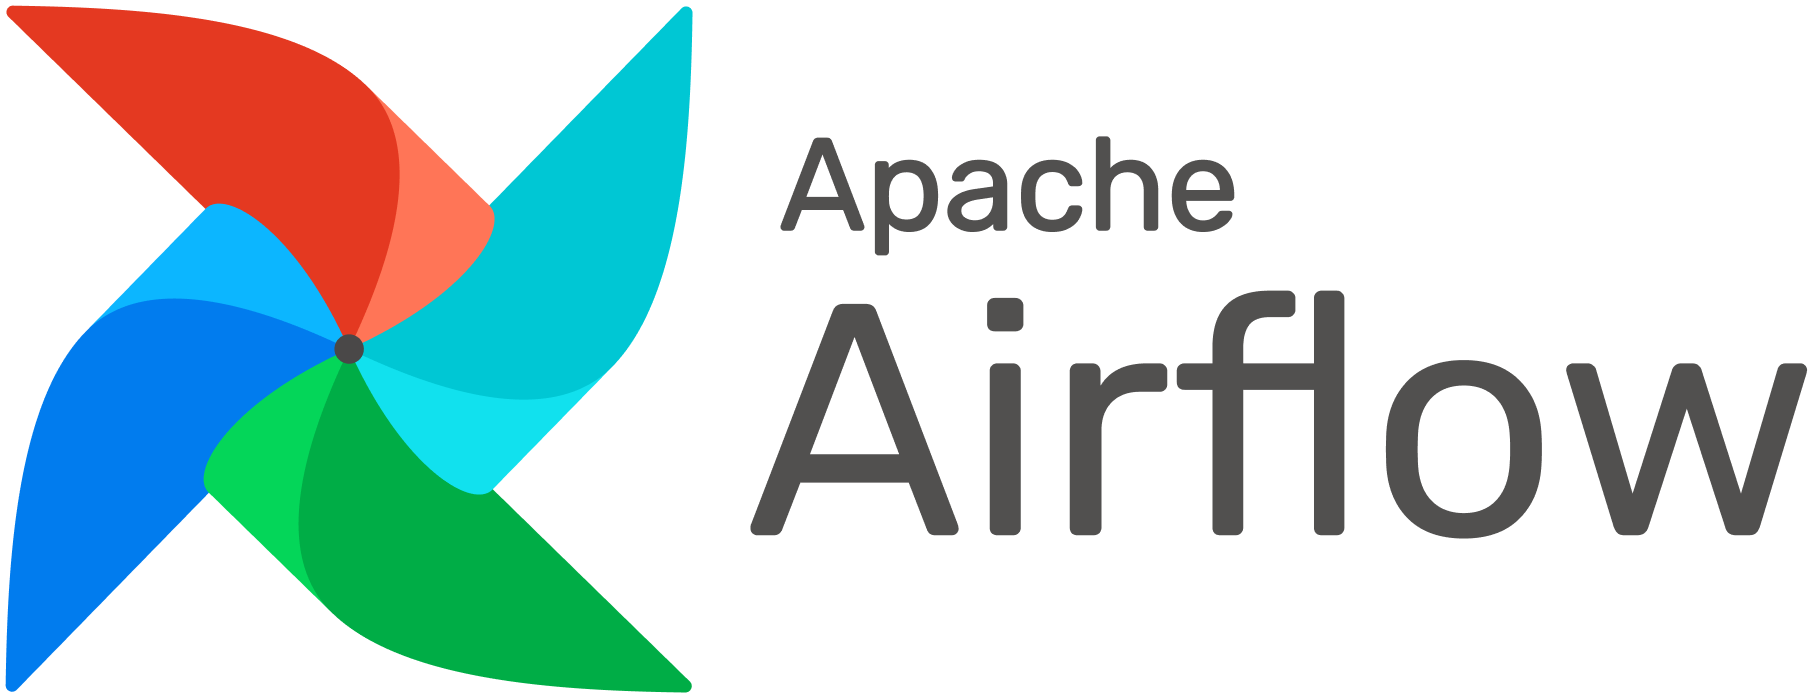 Best apache airflow interview questions for experienced candidates